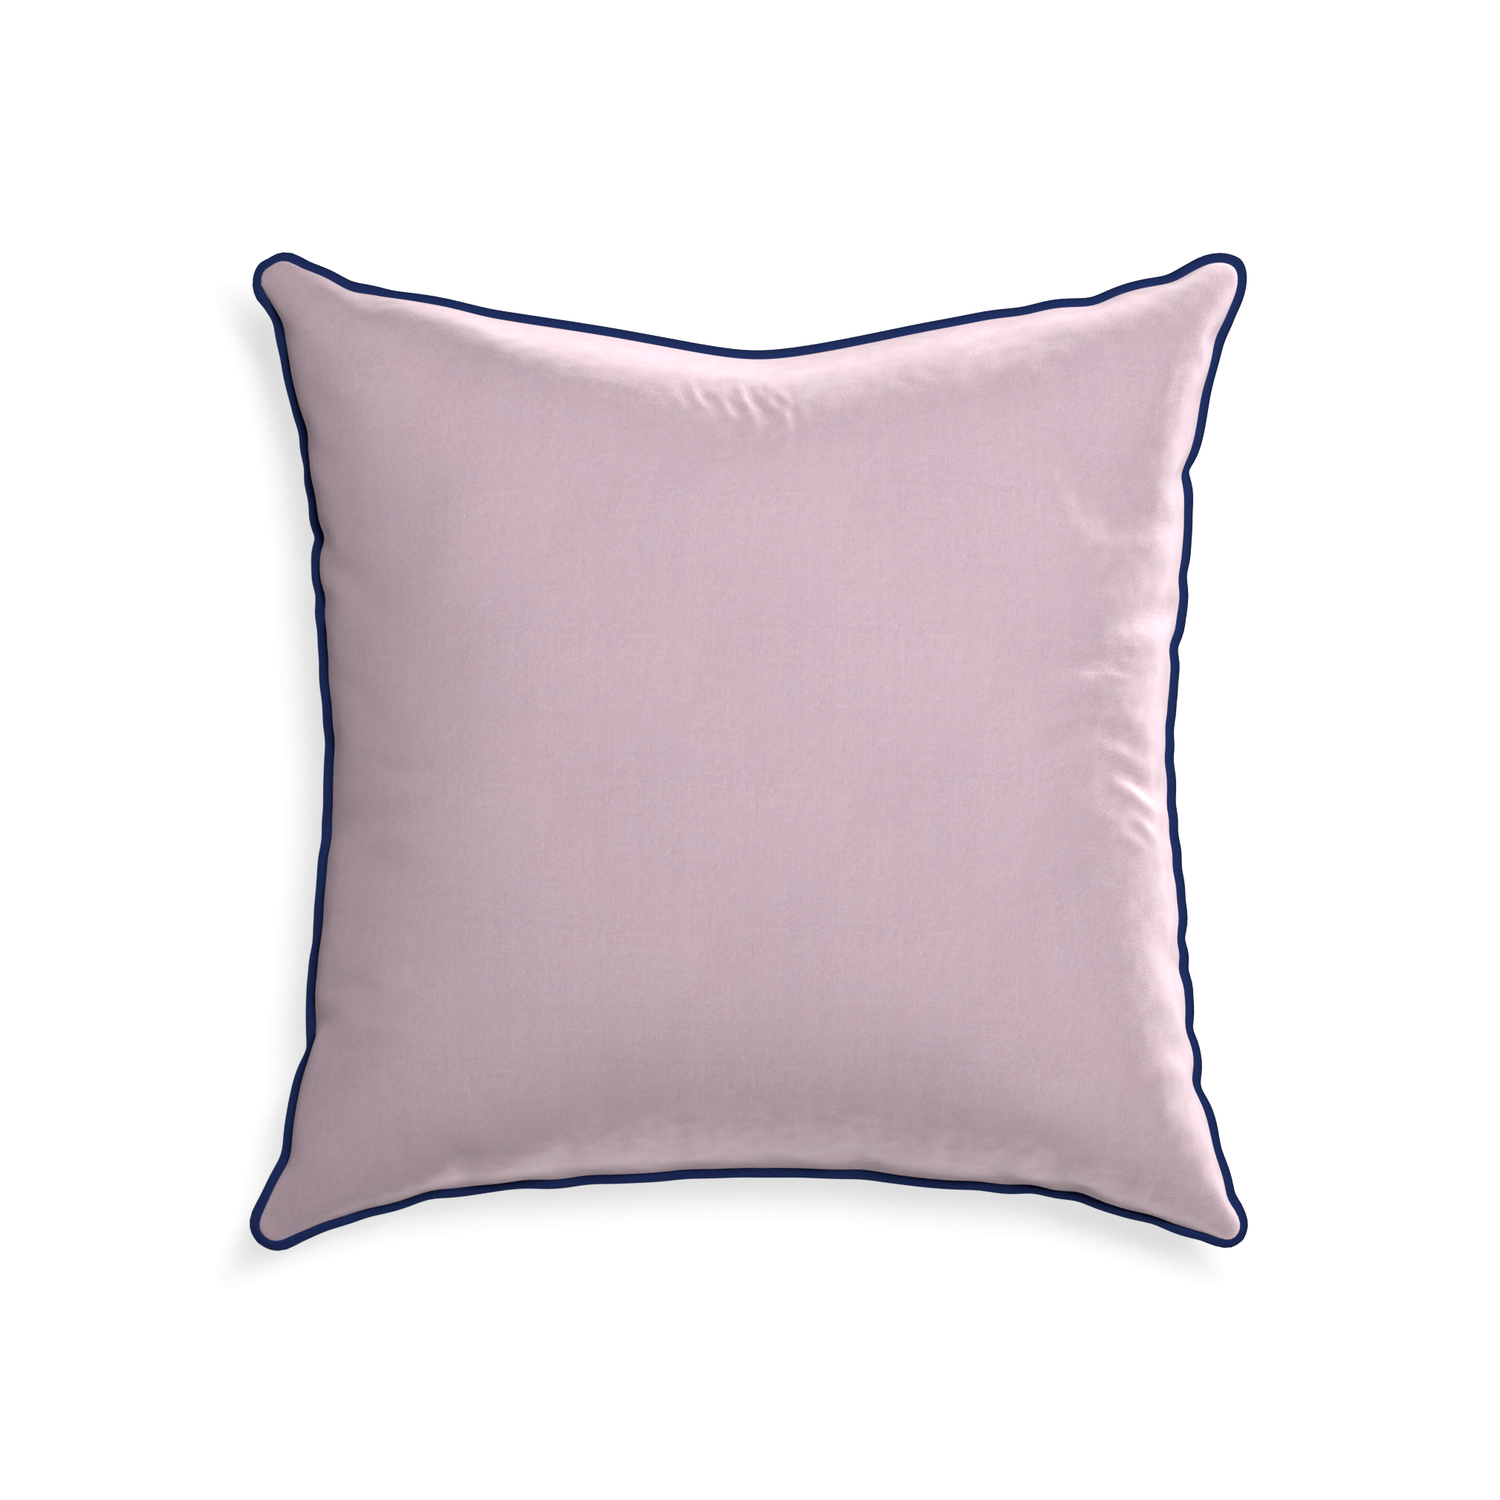 22-square lilac velvet custom lilacpillow with midnight piping on white background